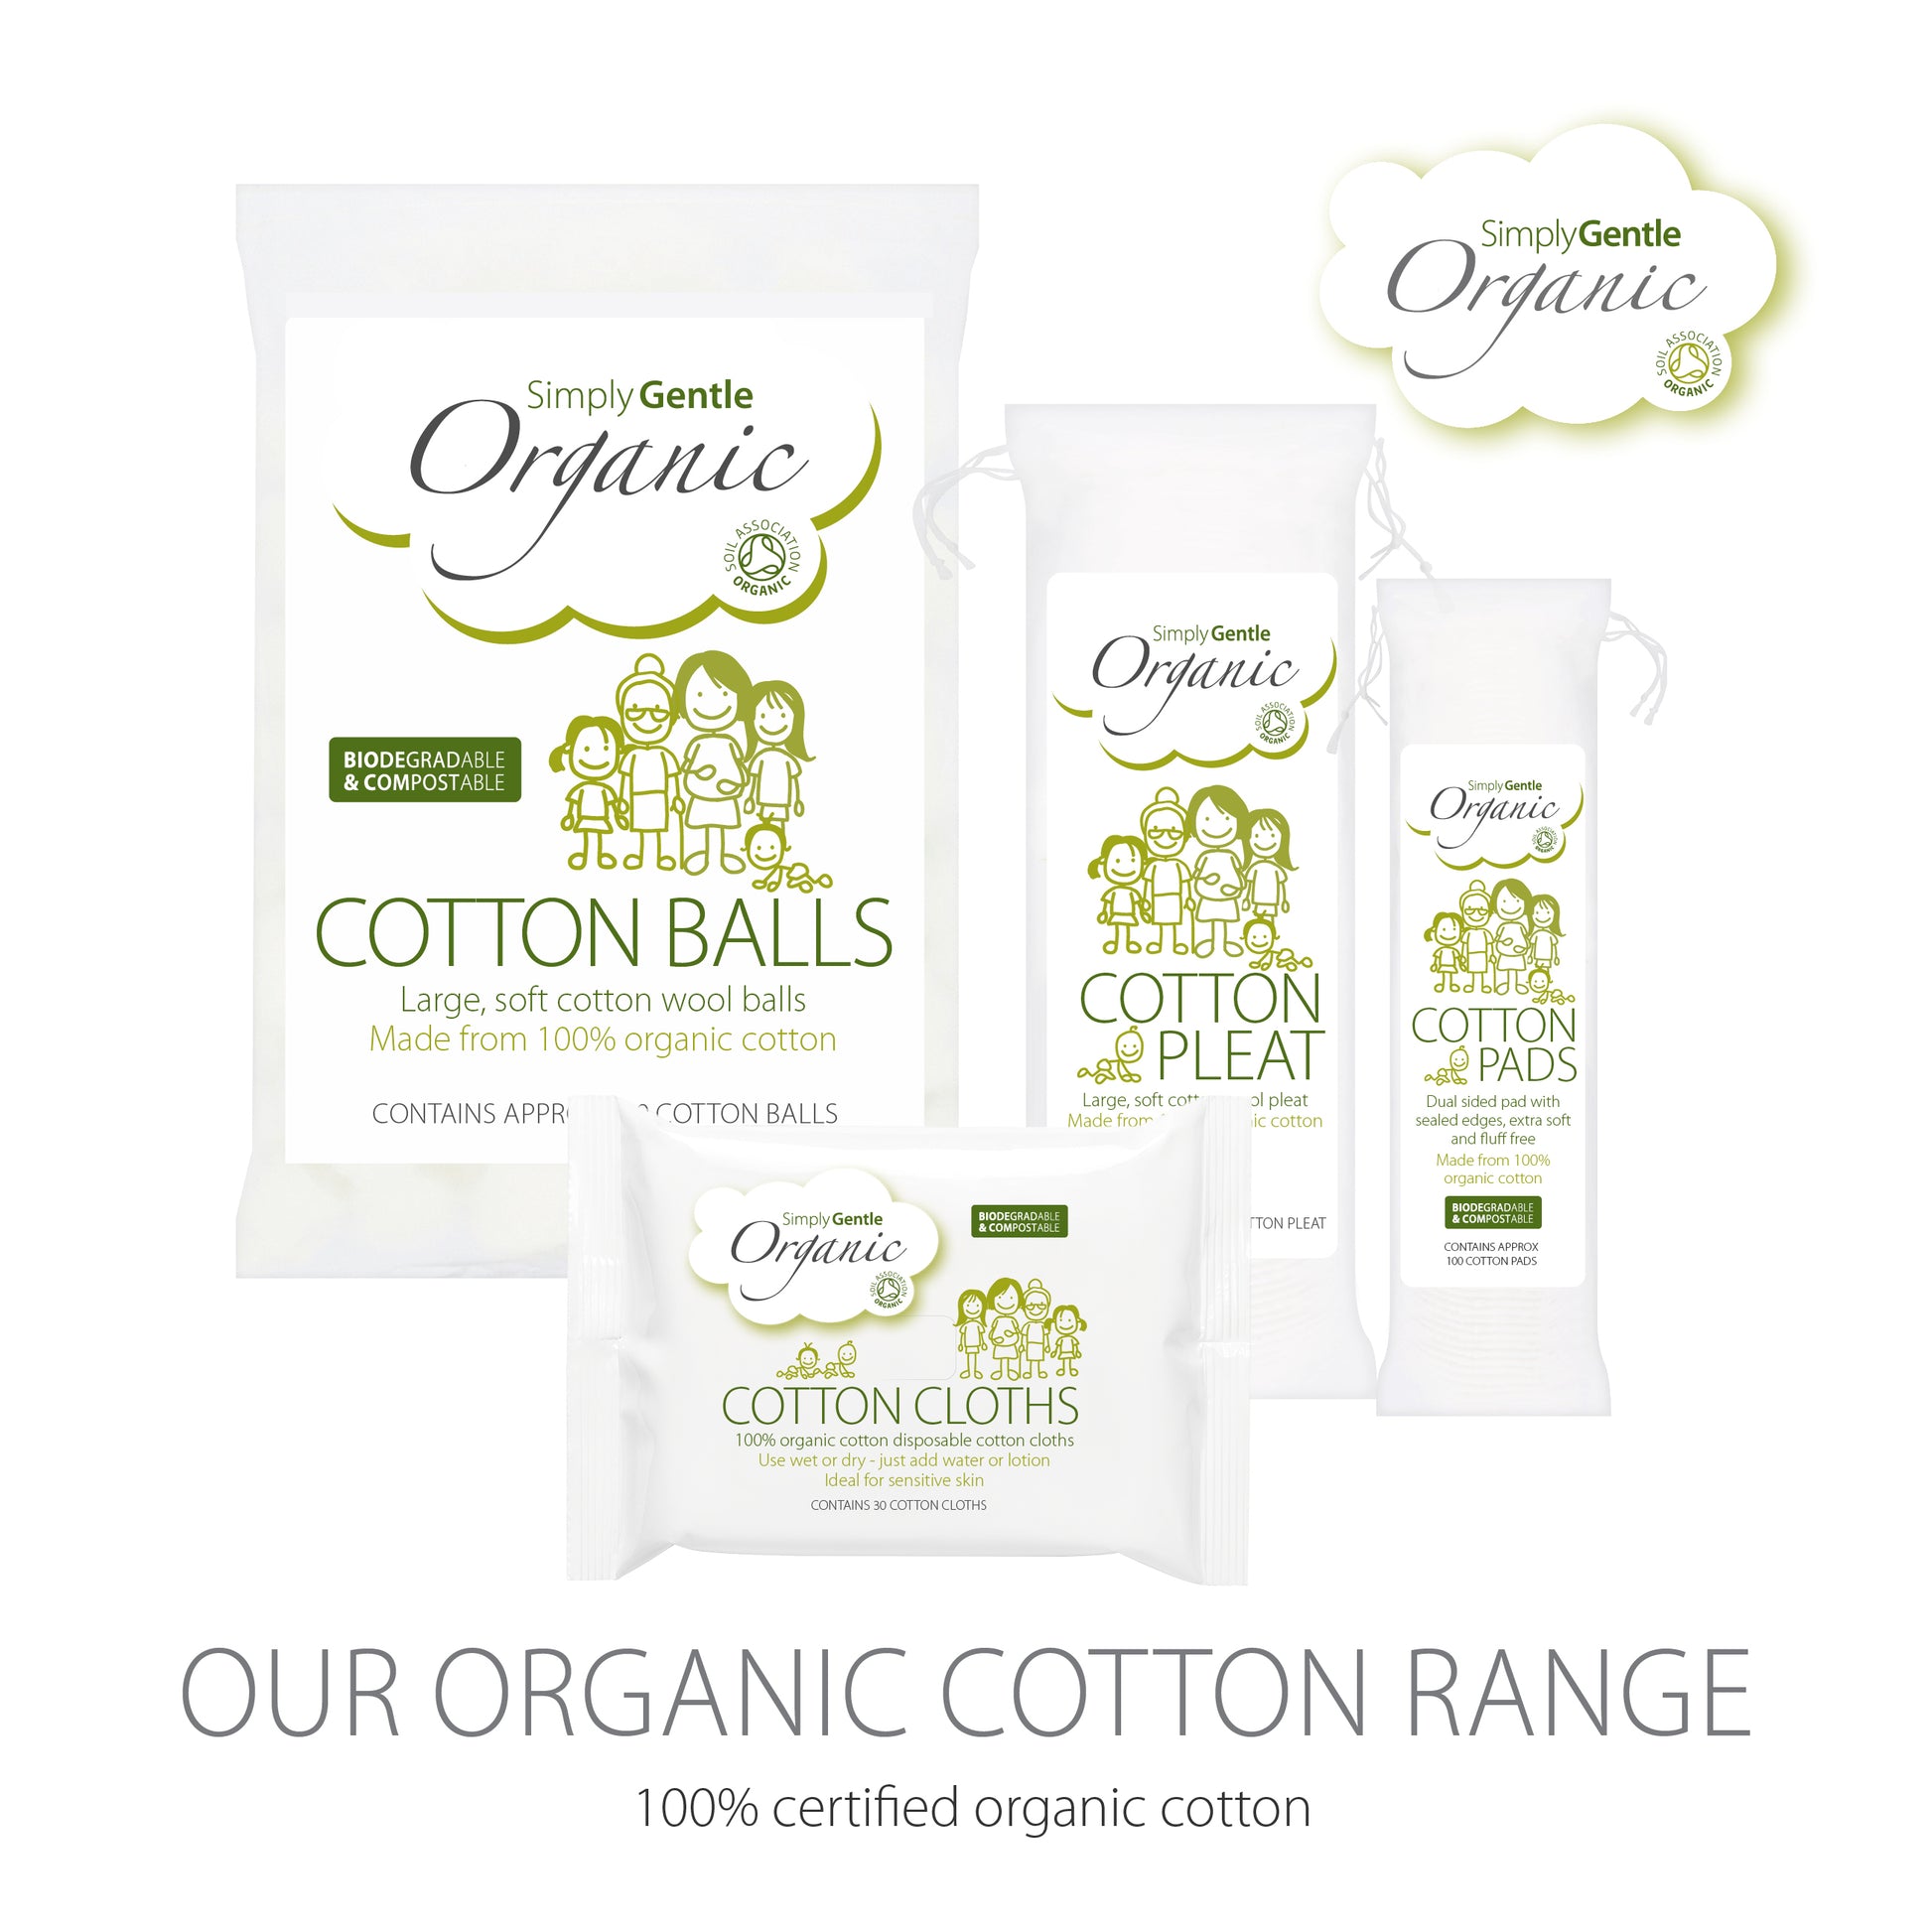 The Simply Gentle Organic Cotton Care range combines natural and organic ingredients, Simply Gentle’s products means that you are doing more than just looking after yourself and your family, you are also looking after the environment in which you both grow.